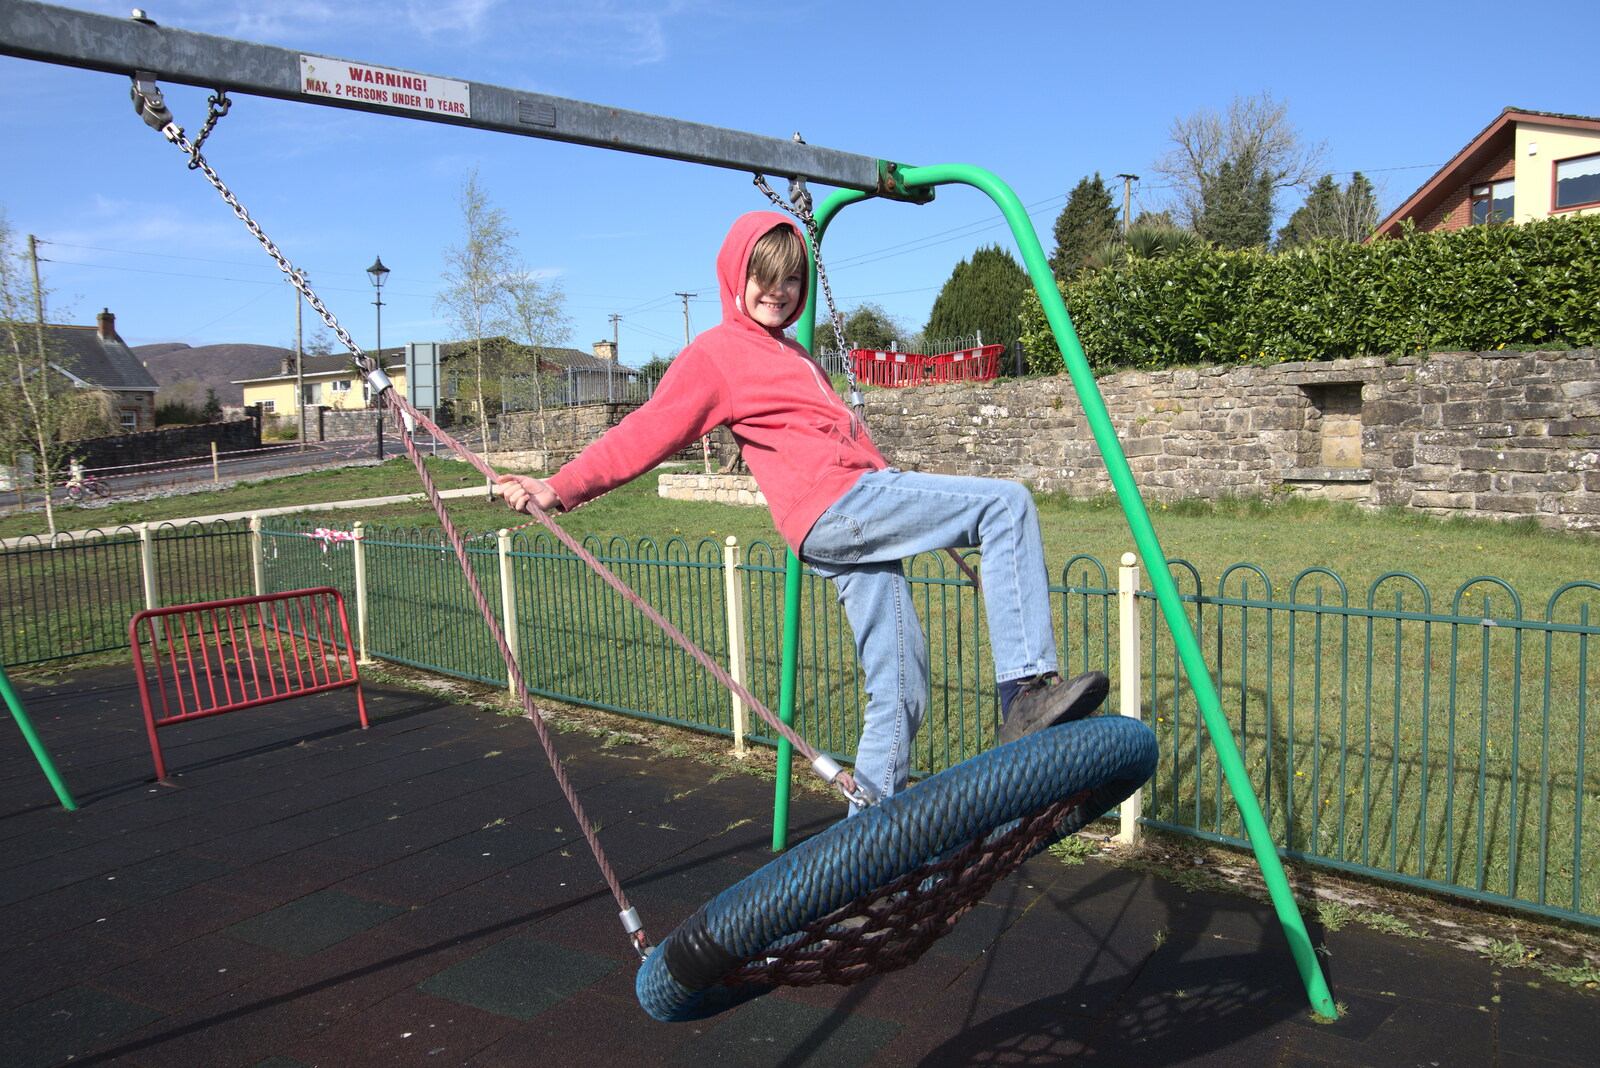 Harry on a tyre swing from Manorhamilton and Bundoran, Leitrim and Donegal, Ireland - 16th April 2022